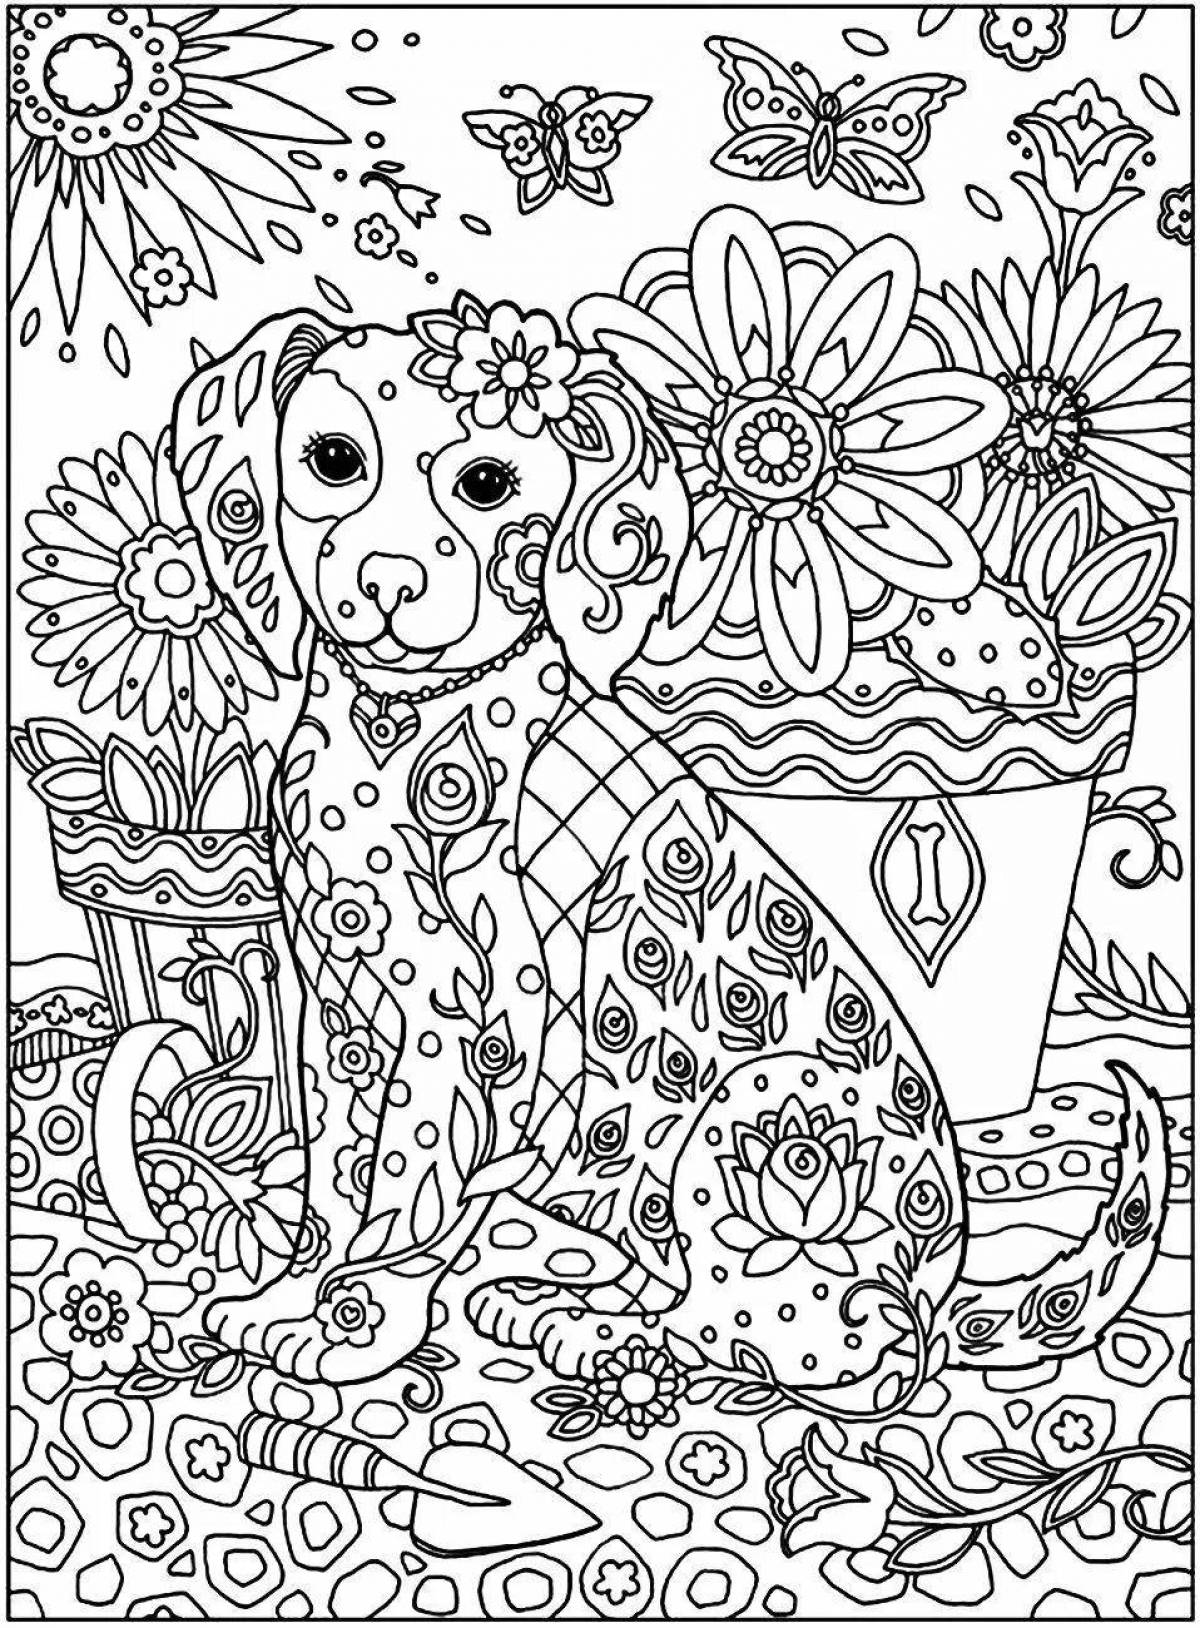 Funny 10 year old animals coloring book